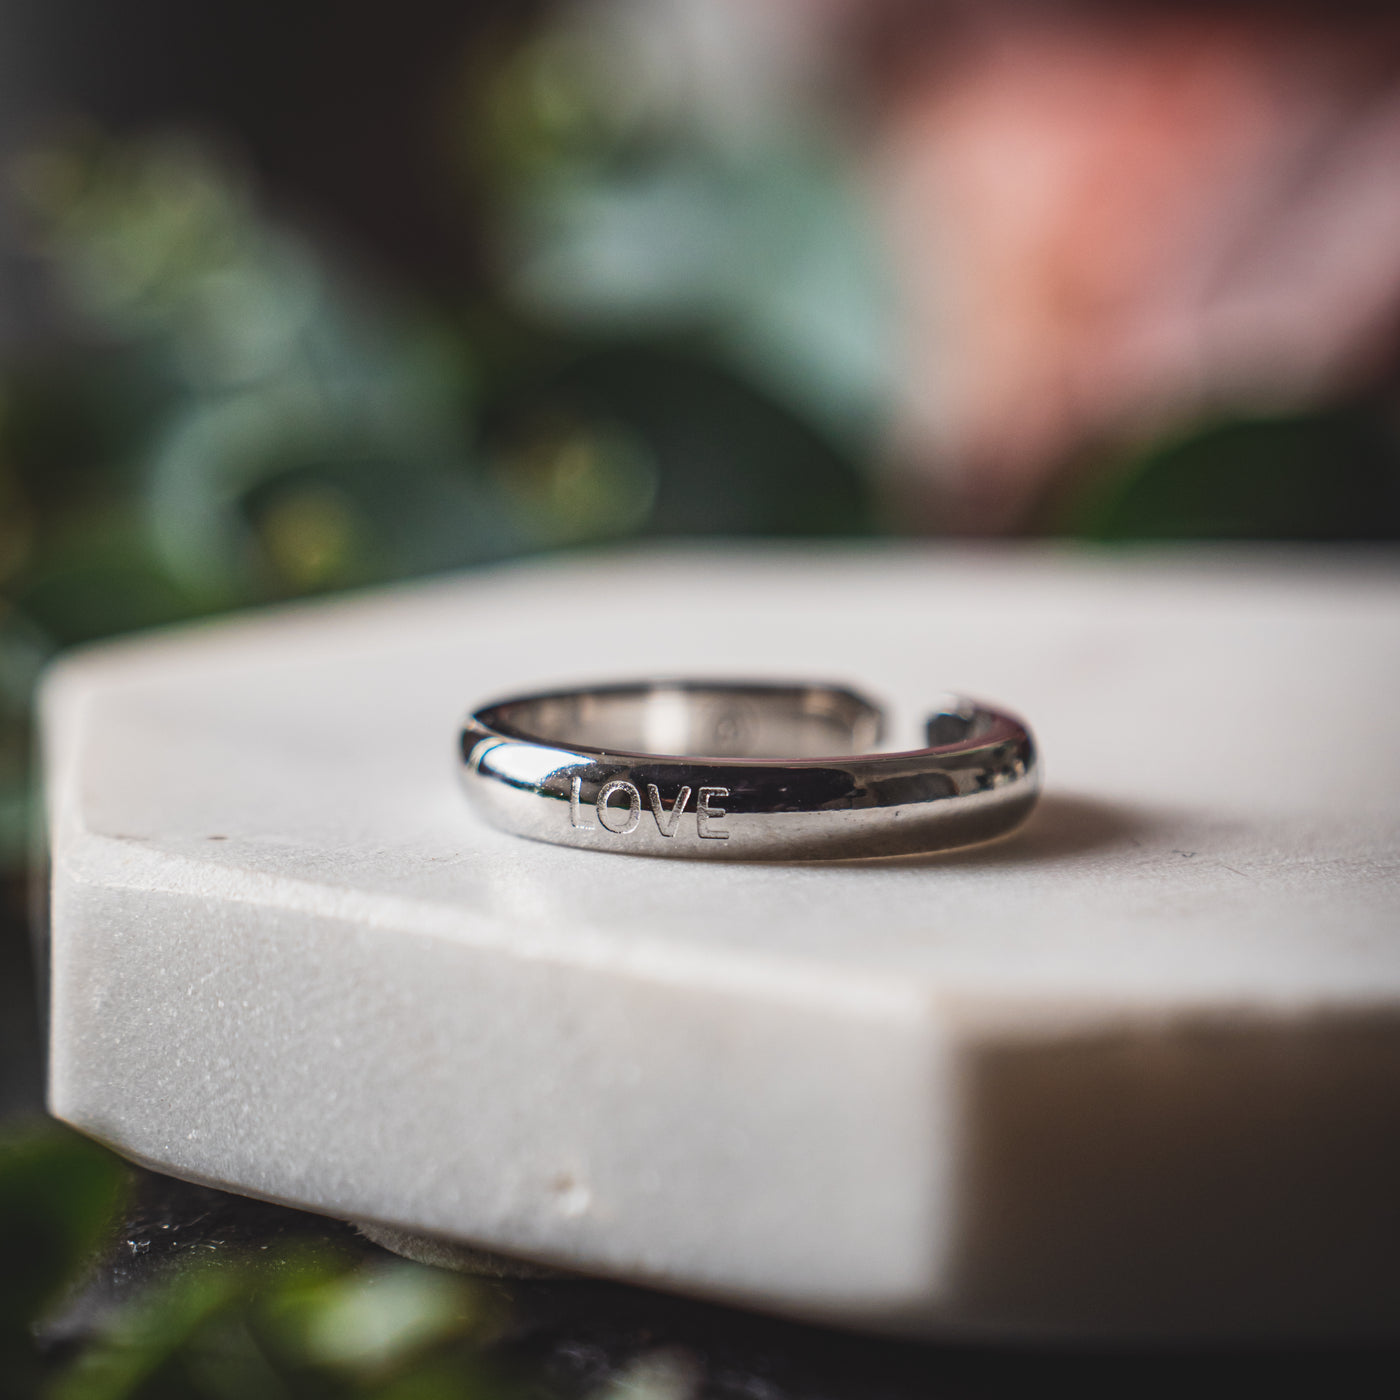 Stainless steel ring with the word 'LOVE' engraved, displayed on a white surface with a blurred green background